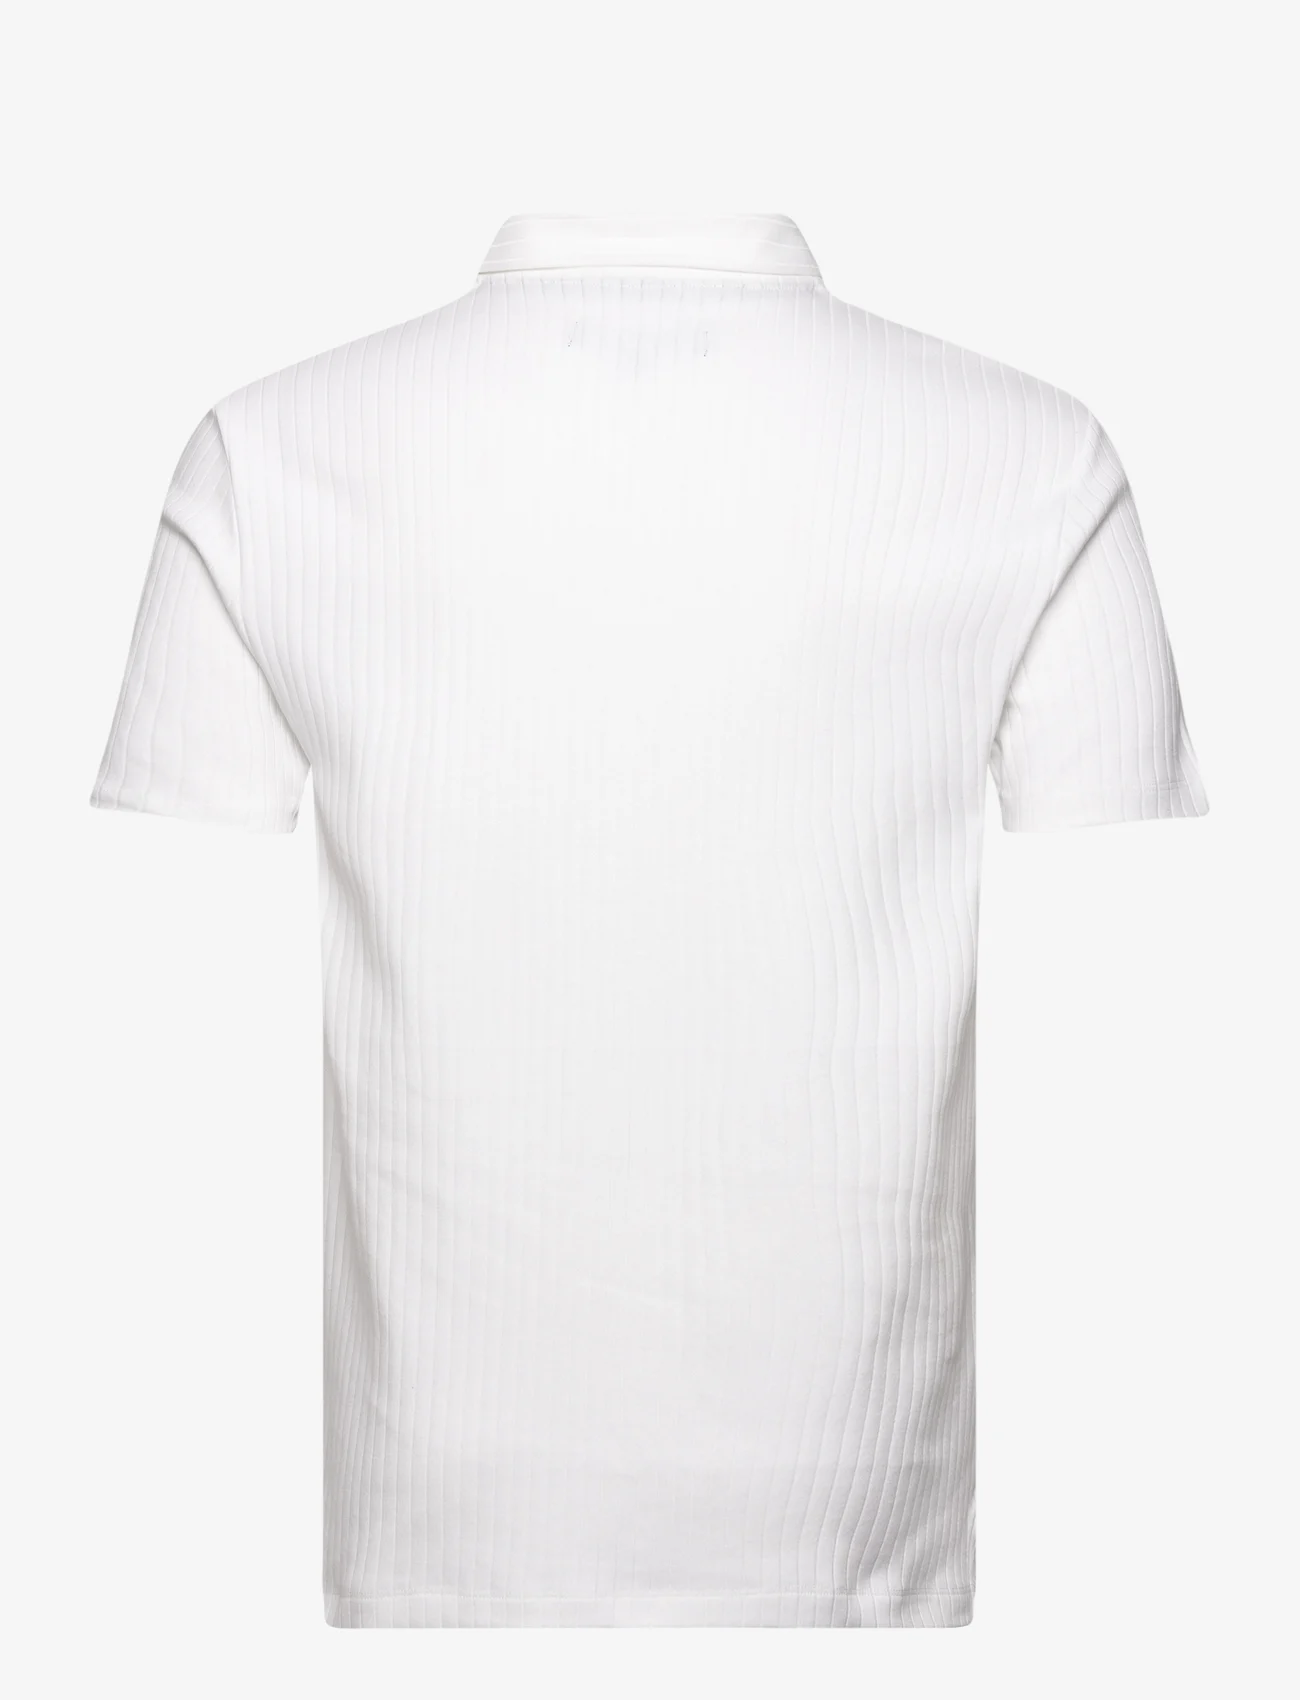 French Connection - NEEDLE DROP TROPHY NECK POLO - short-sleeved polos - white - 1